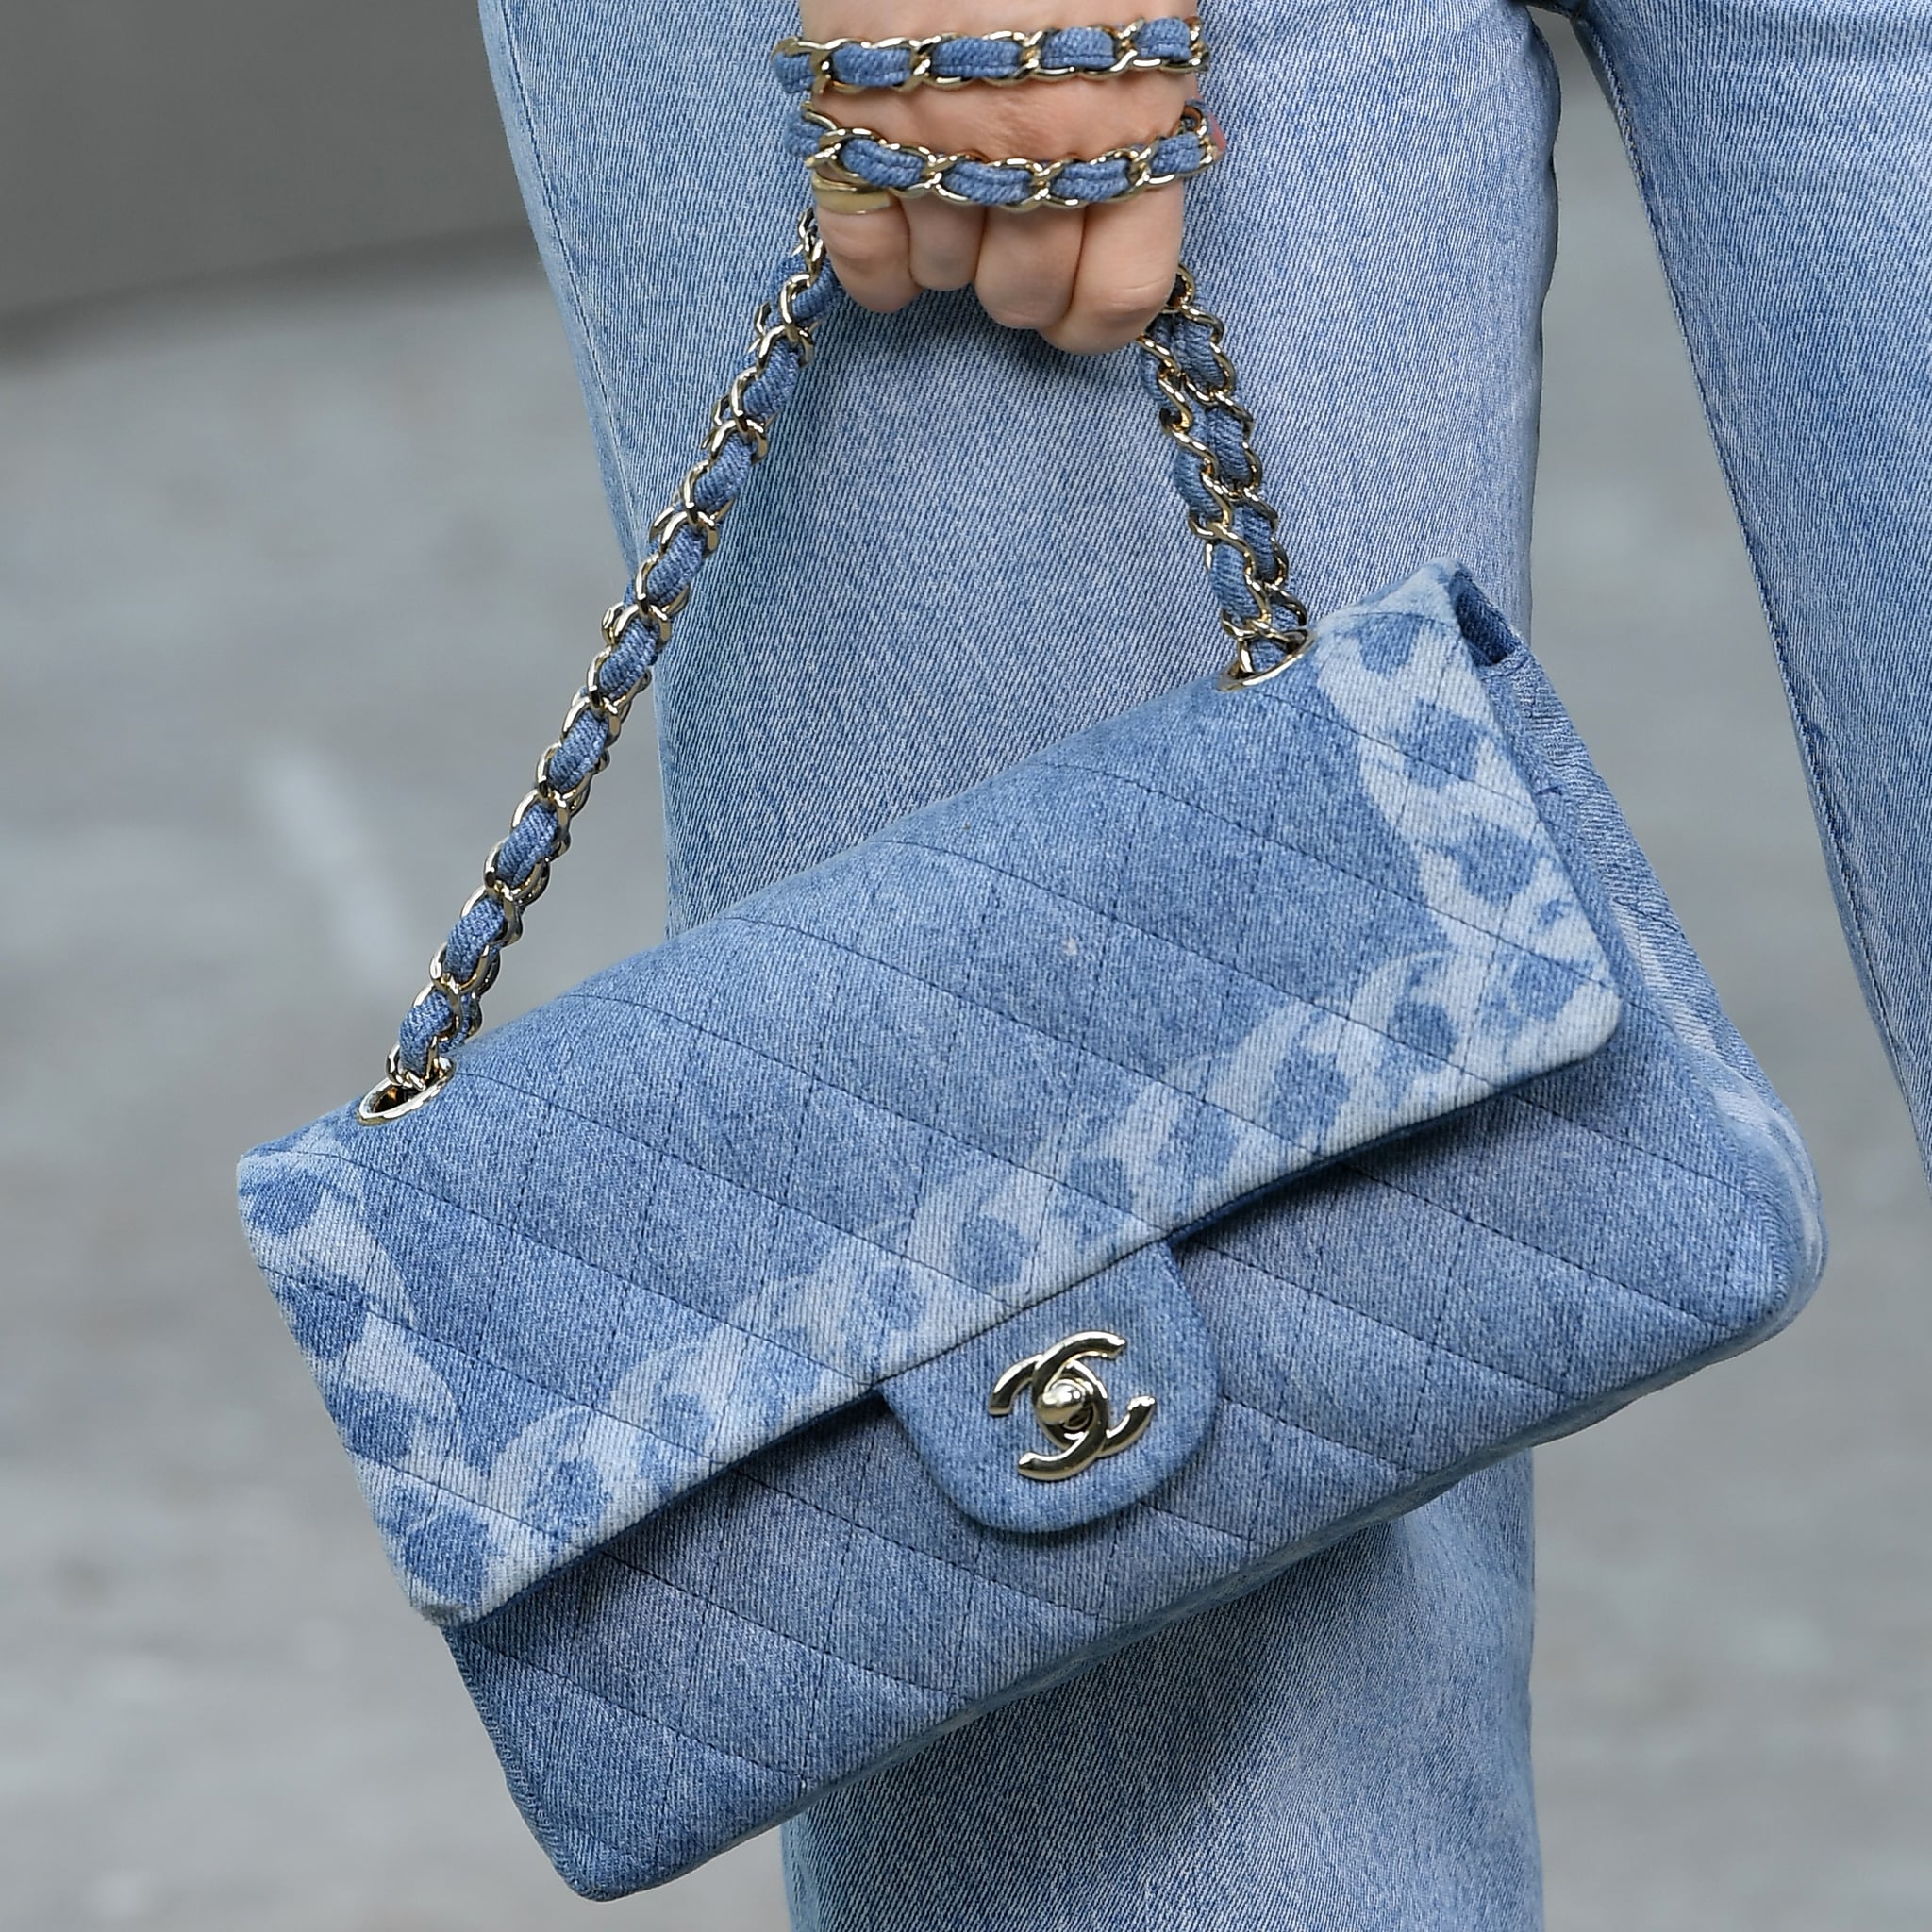 Chanel Cruise 2022 Classic Bag Collection